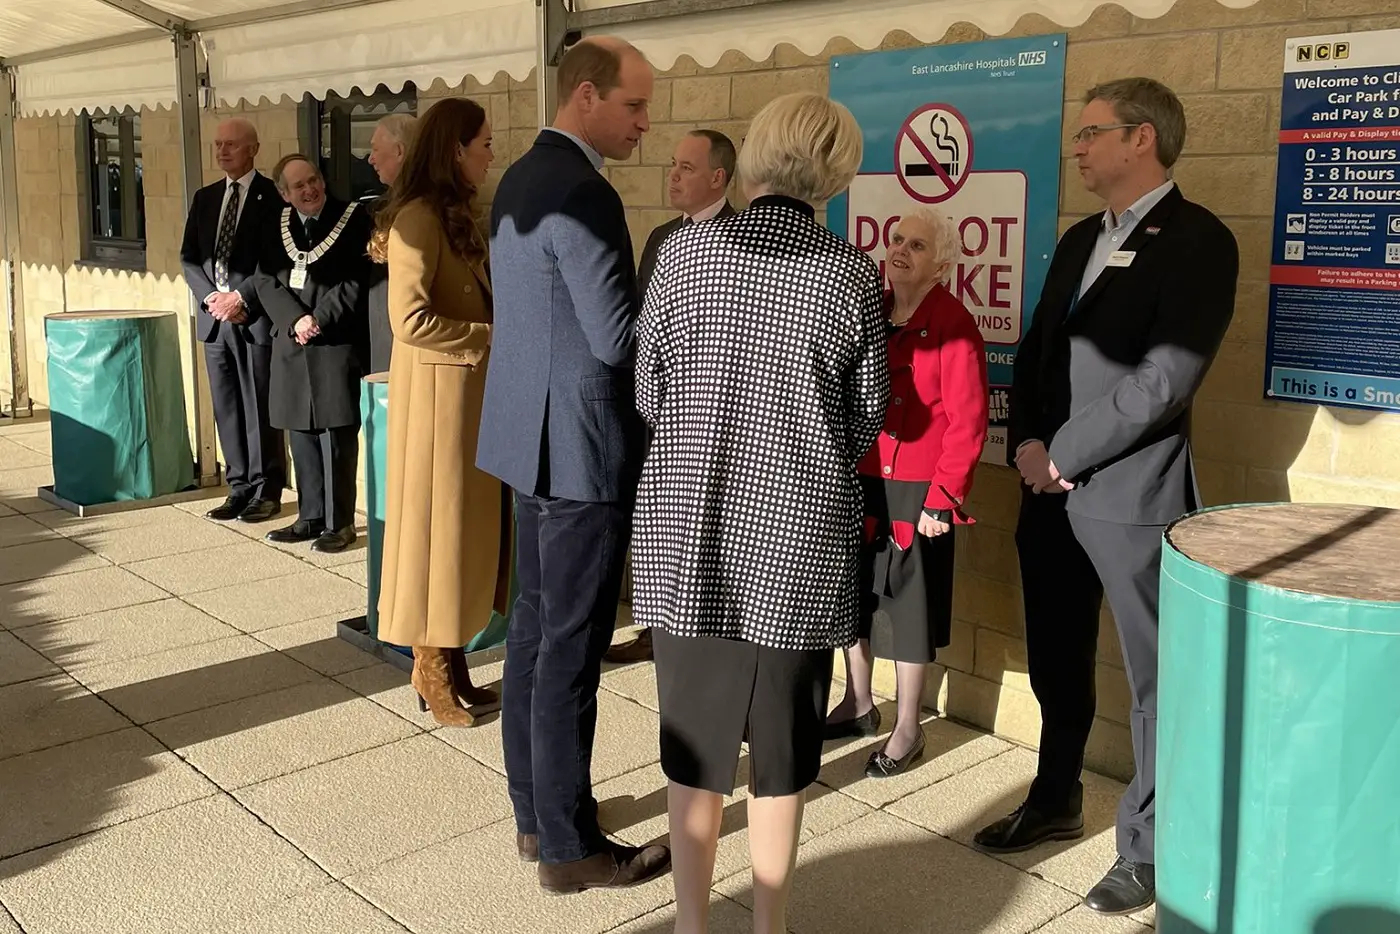 The Duke and Duchess of Cambirdge visited Clitheroe